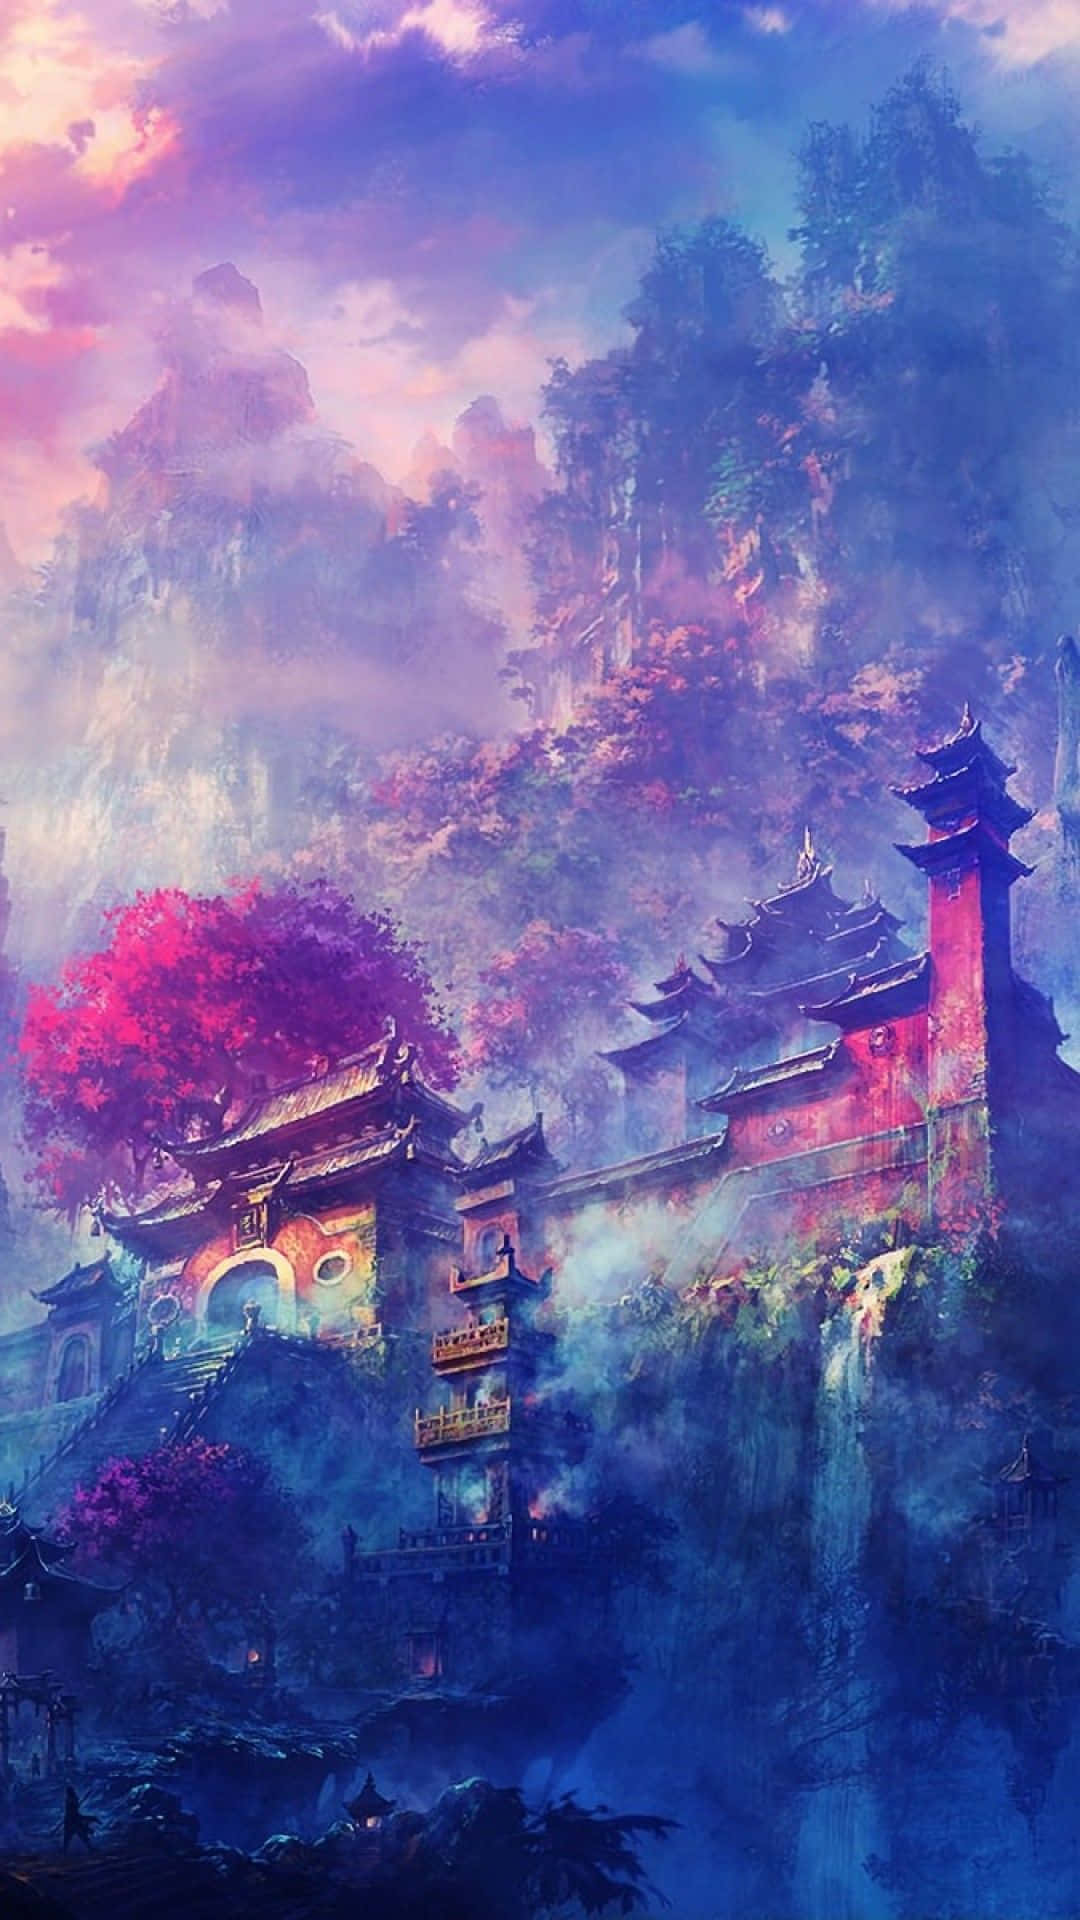 A Painting Of A Chinese Village With A Waterfall